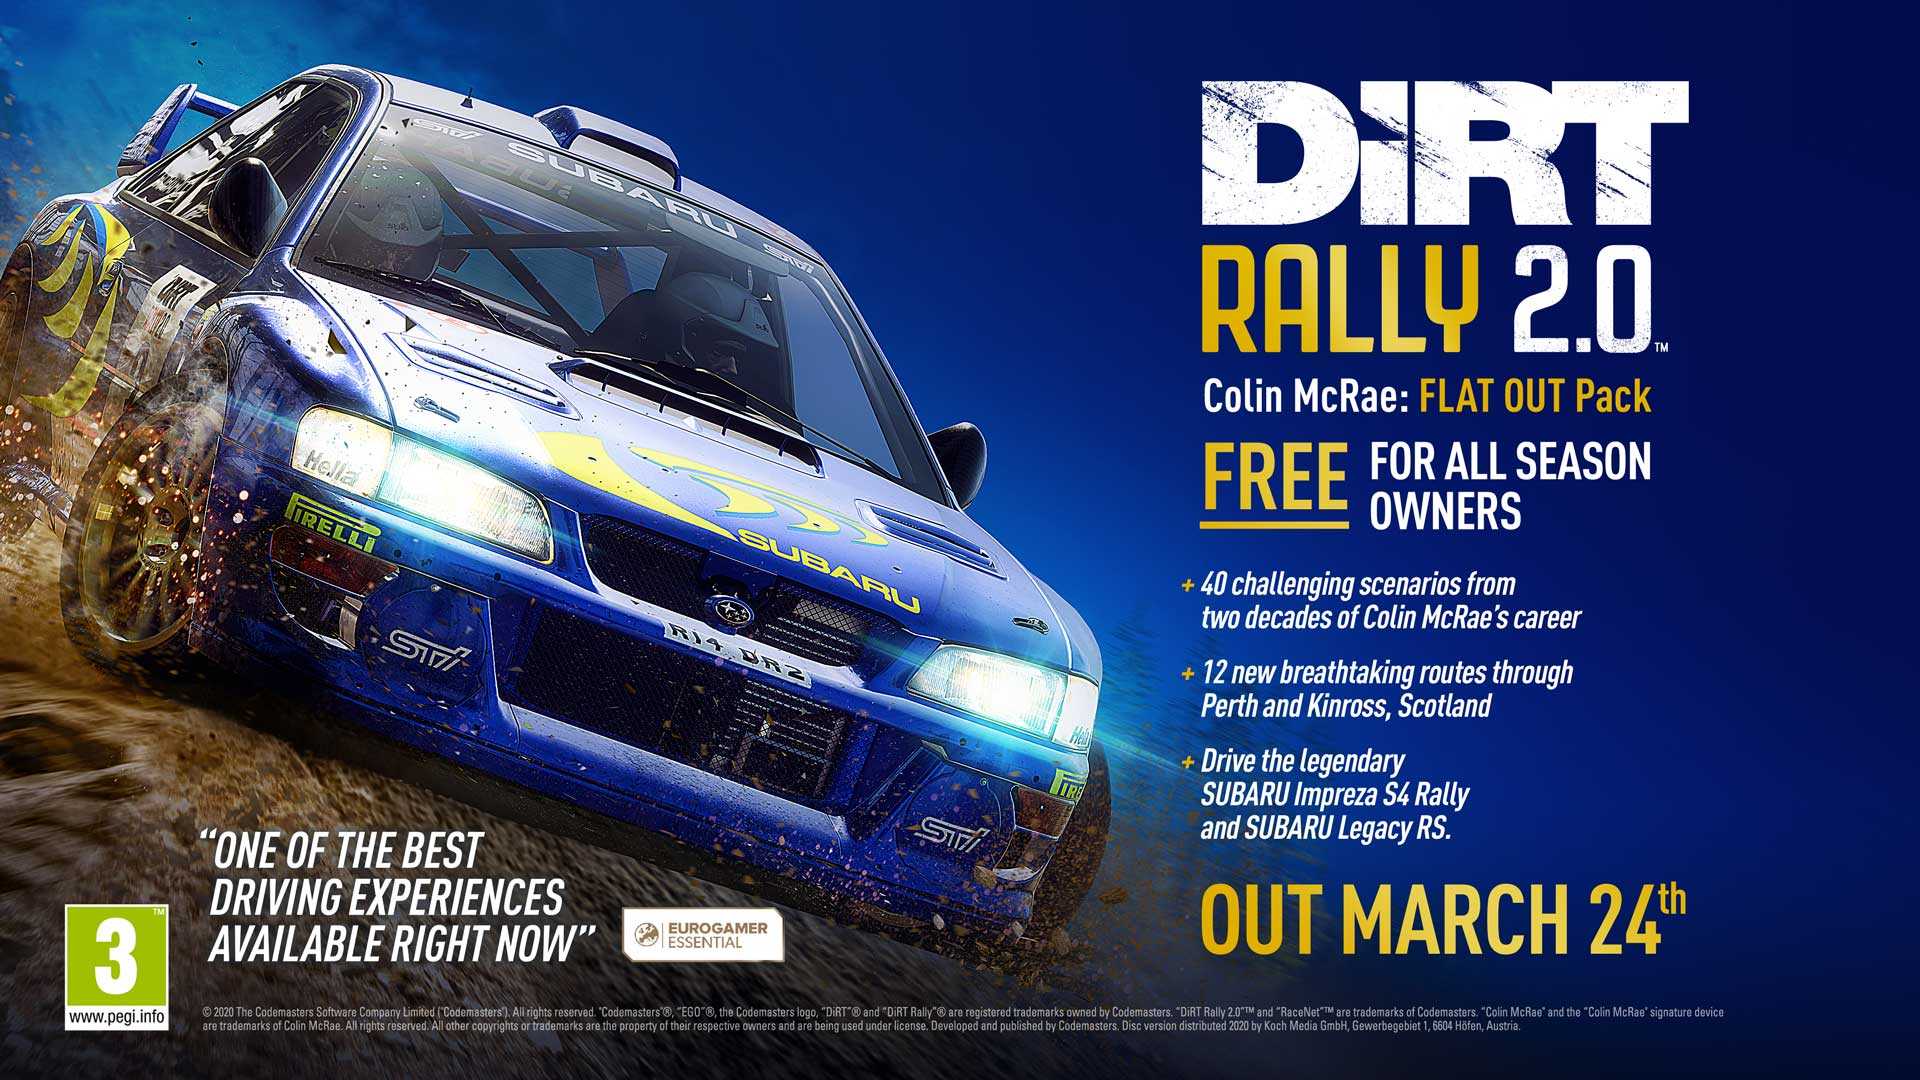 DiRT Rally 2.0. Colin McRae Flat Out